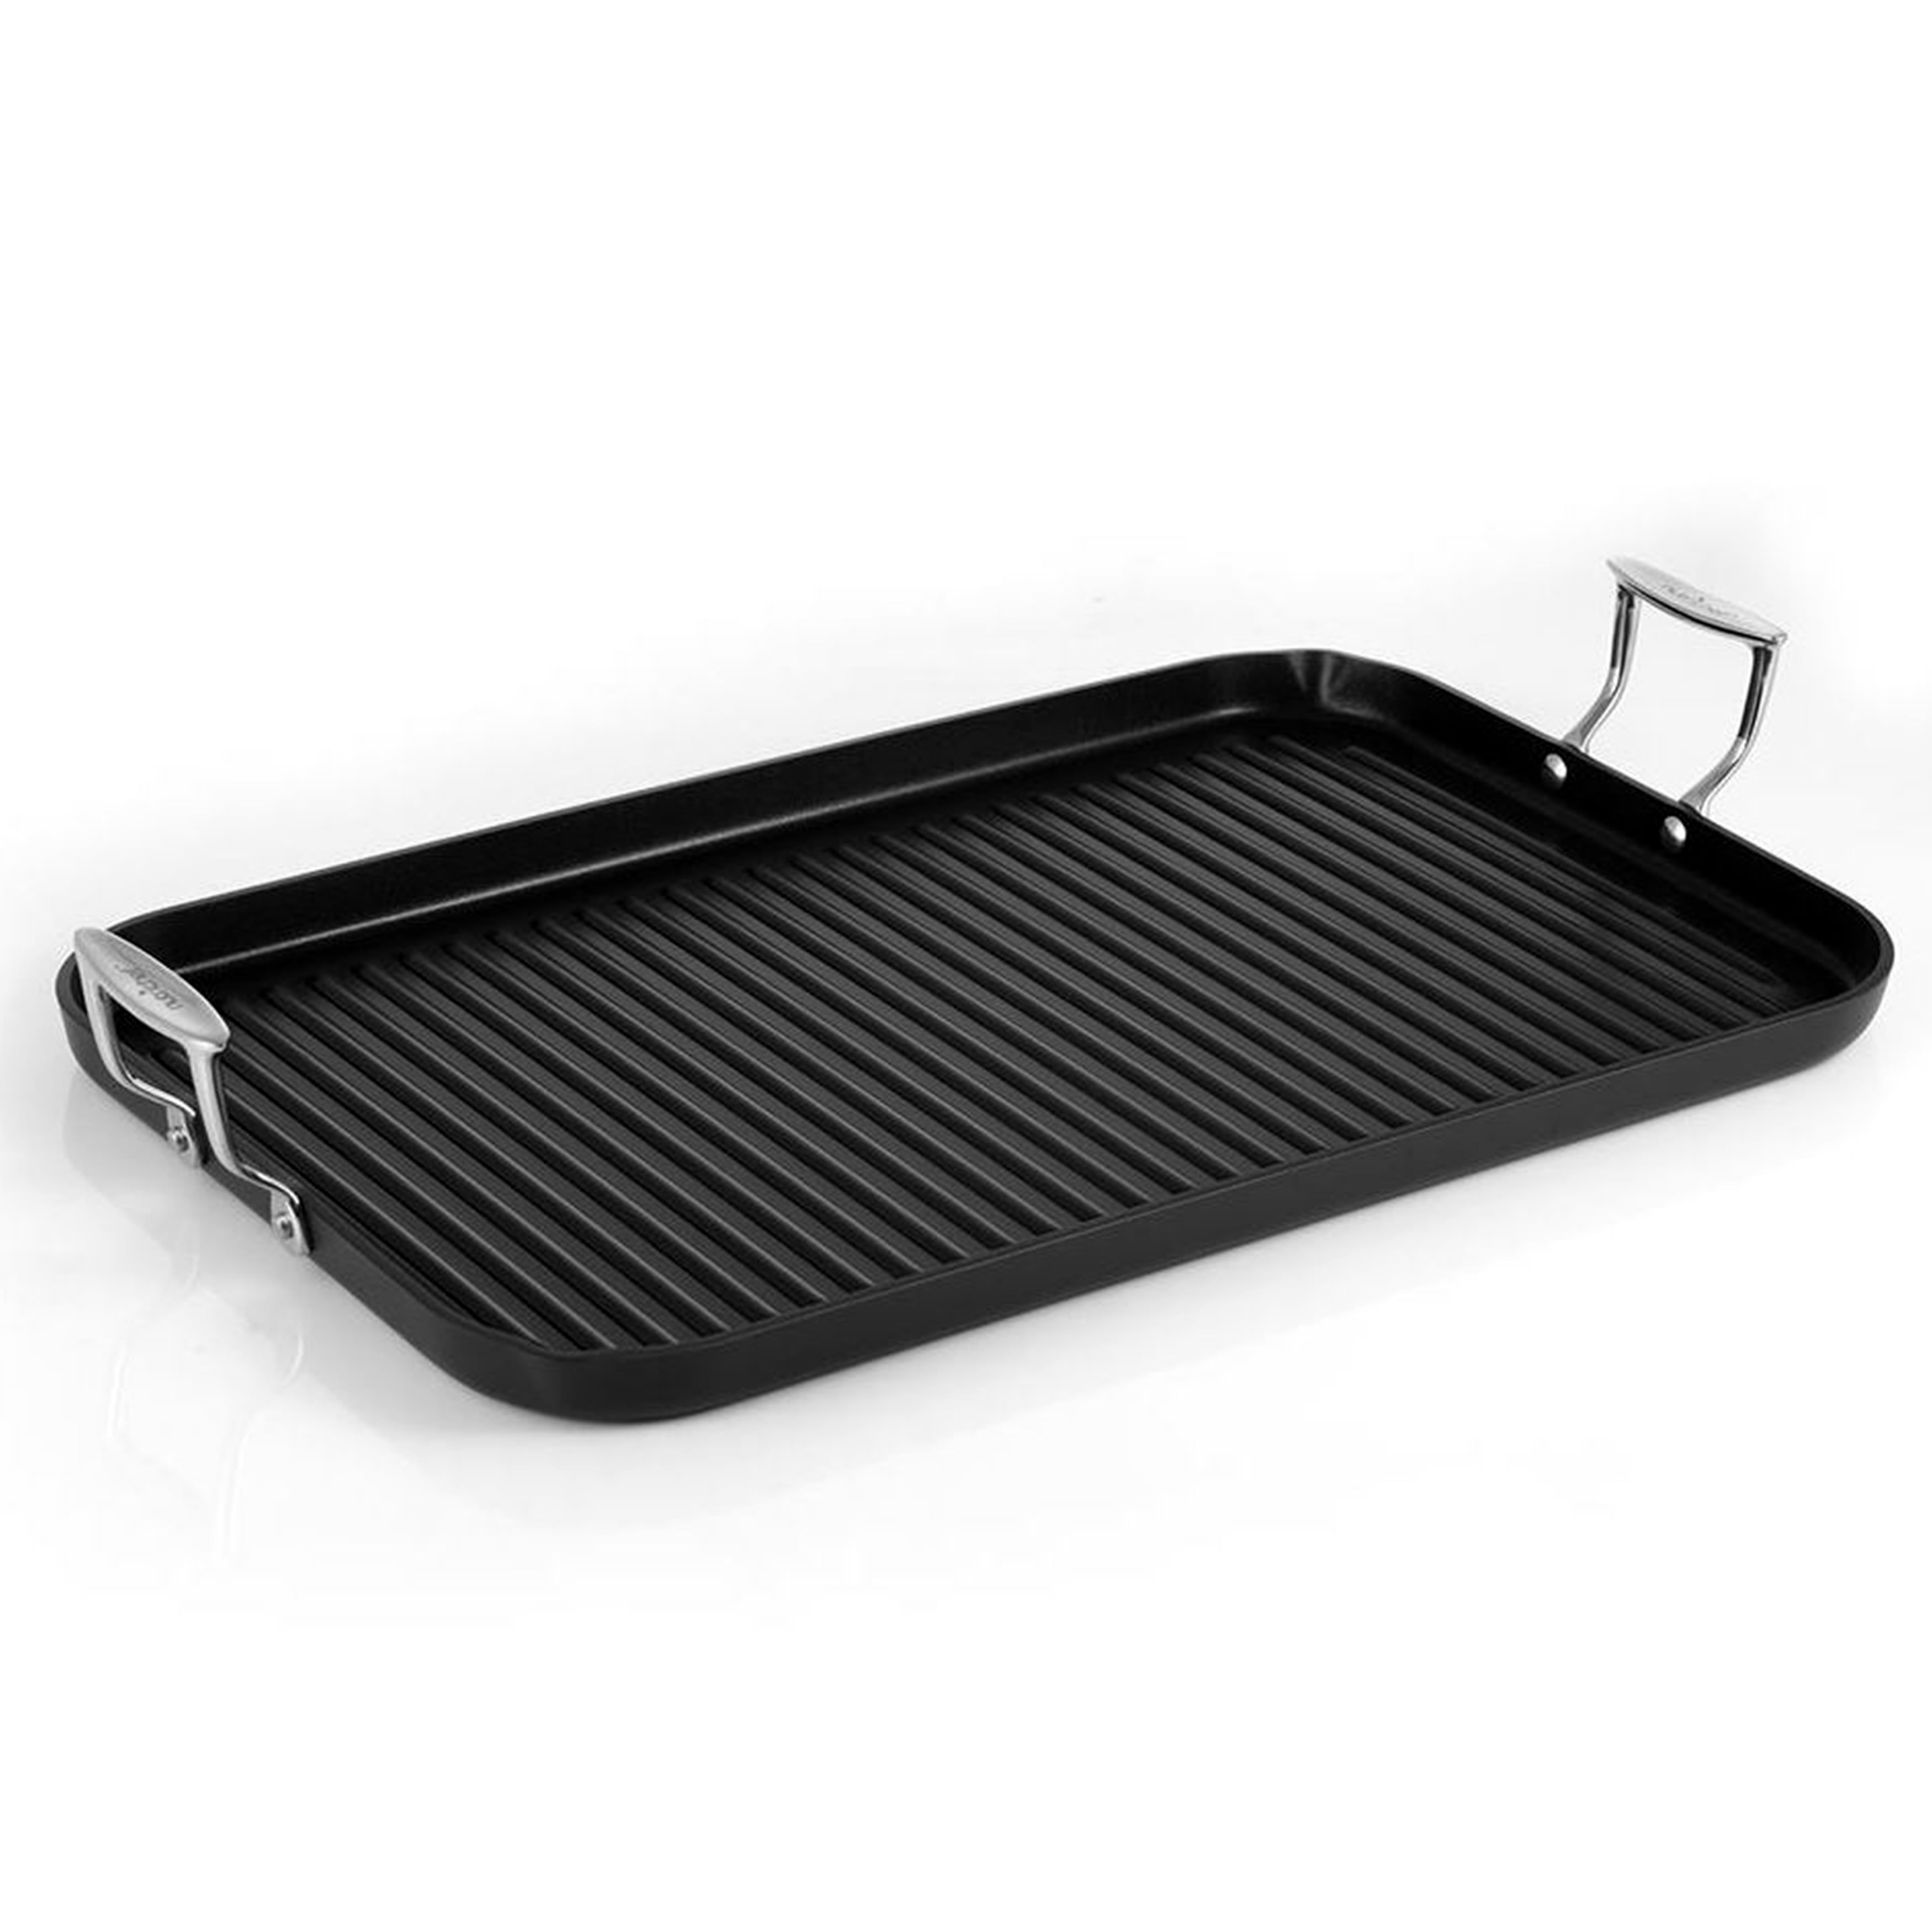  FCUS Grill Pan for Gas Stove Top, Grill Pan for Electric Stove  Top Nonstick, 13 Inch Grill Pans for Ovens Safe, Cast Aluminum Griddle Pan  with Lid, Induction/Dishwasher Safe, Indoor/Outdoor: Home